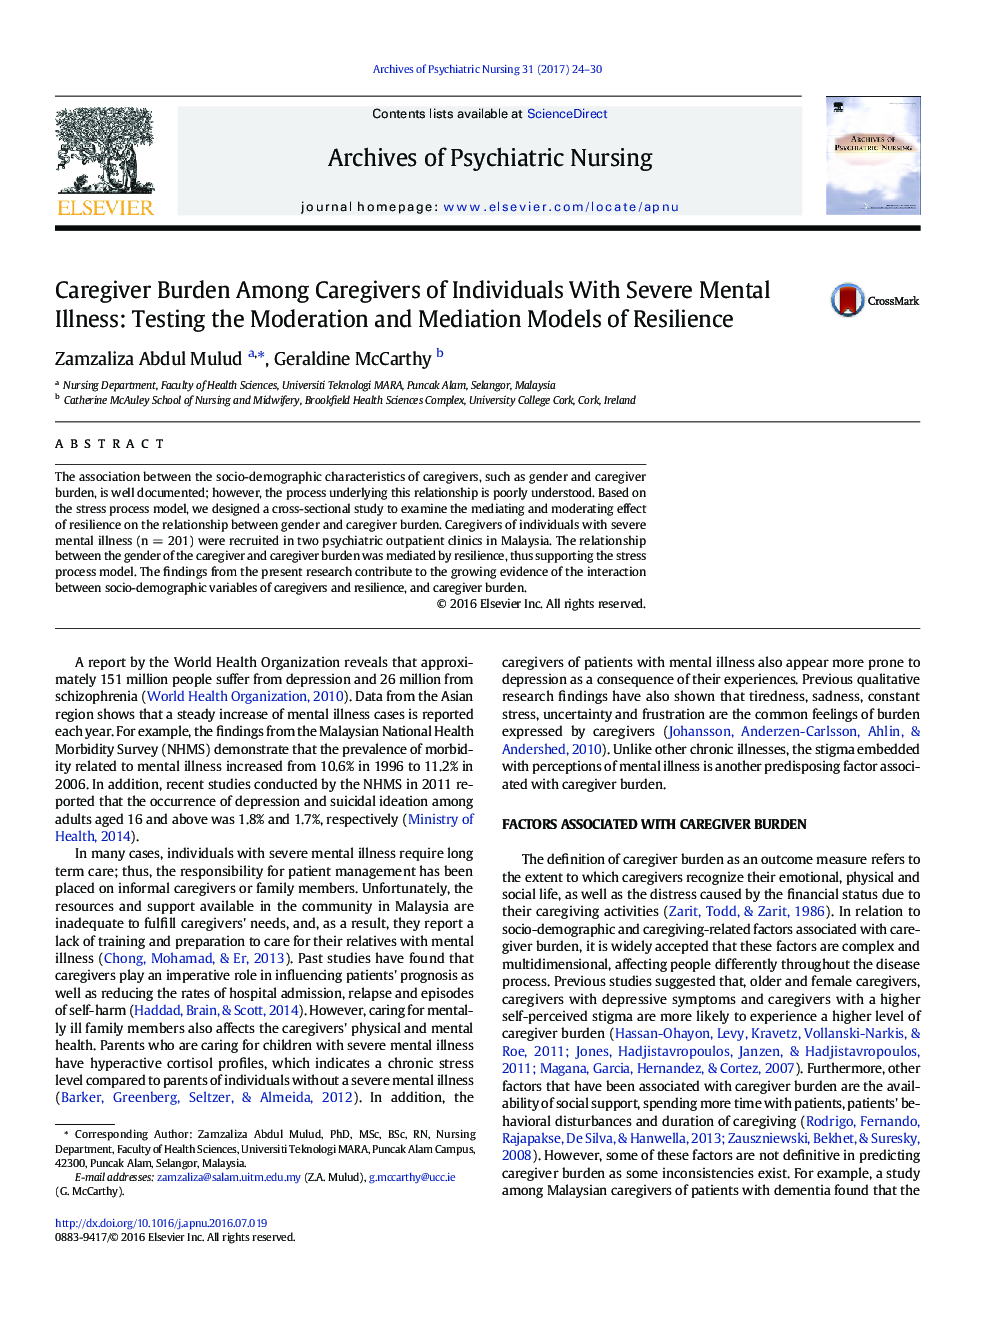 Caregiver Burden Among Caregivers of Individuals With Severe Mental Illness: Testing the Moderation and Mediation Models of Resilience